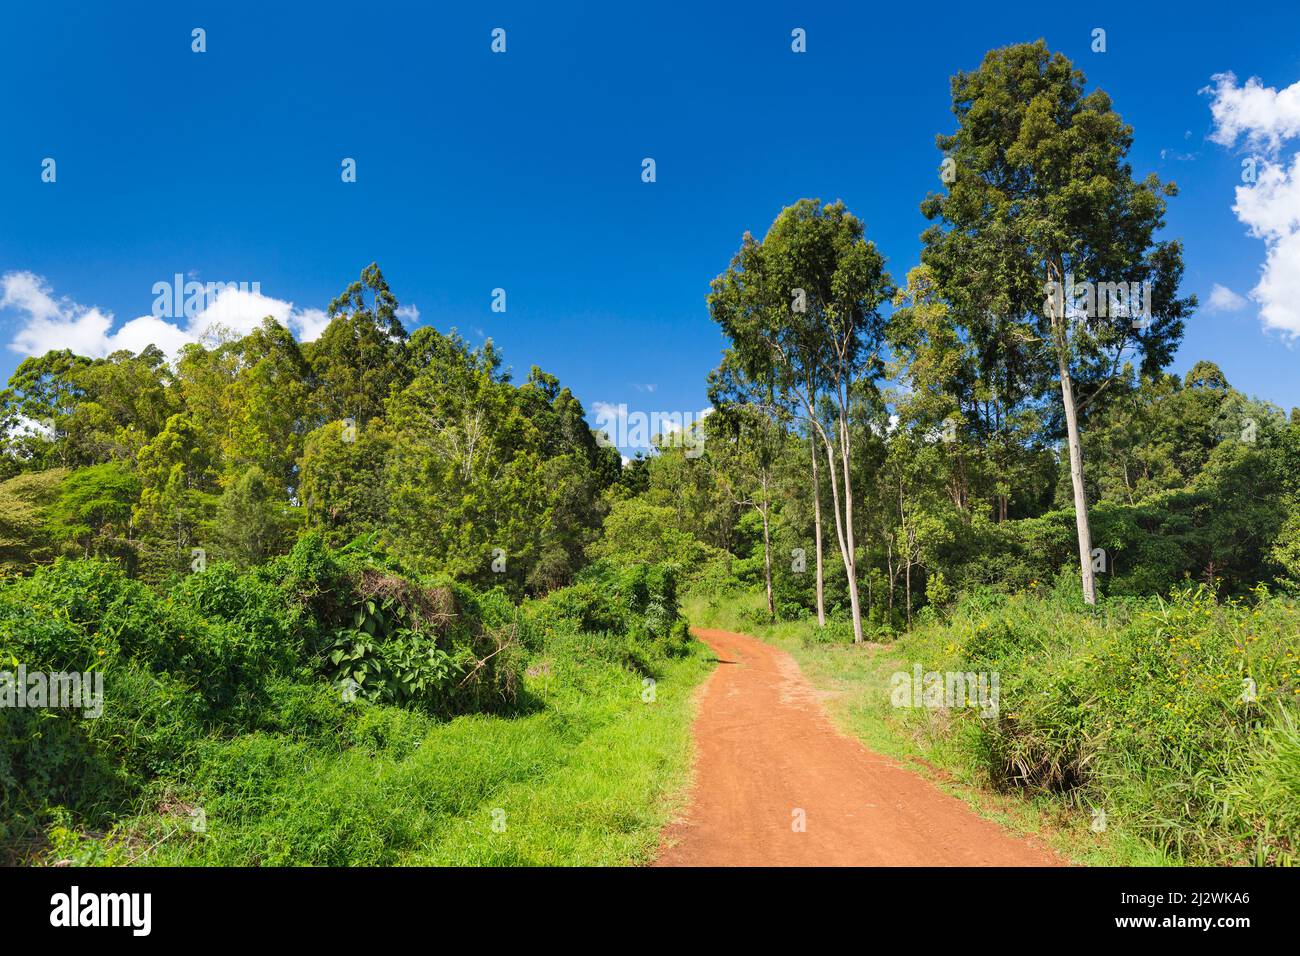 Road with red soil in Karura Forest, Nairobi, Kenya with deep blue sky and some clouds. Stock Photo